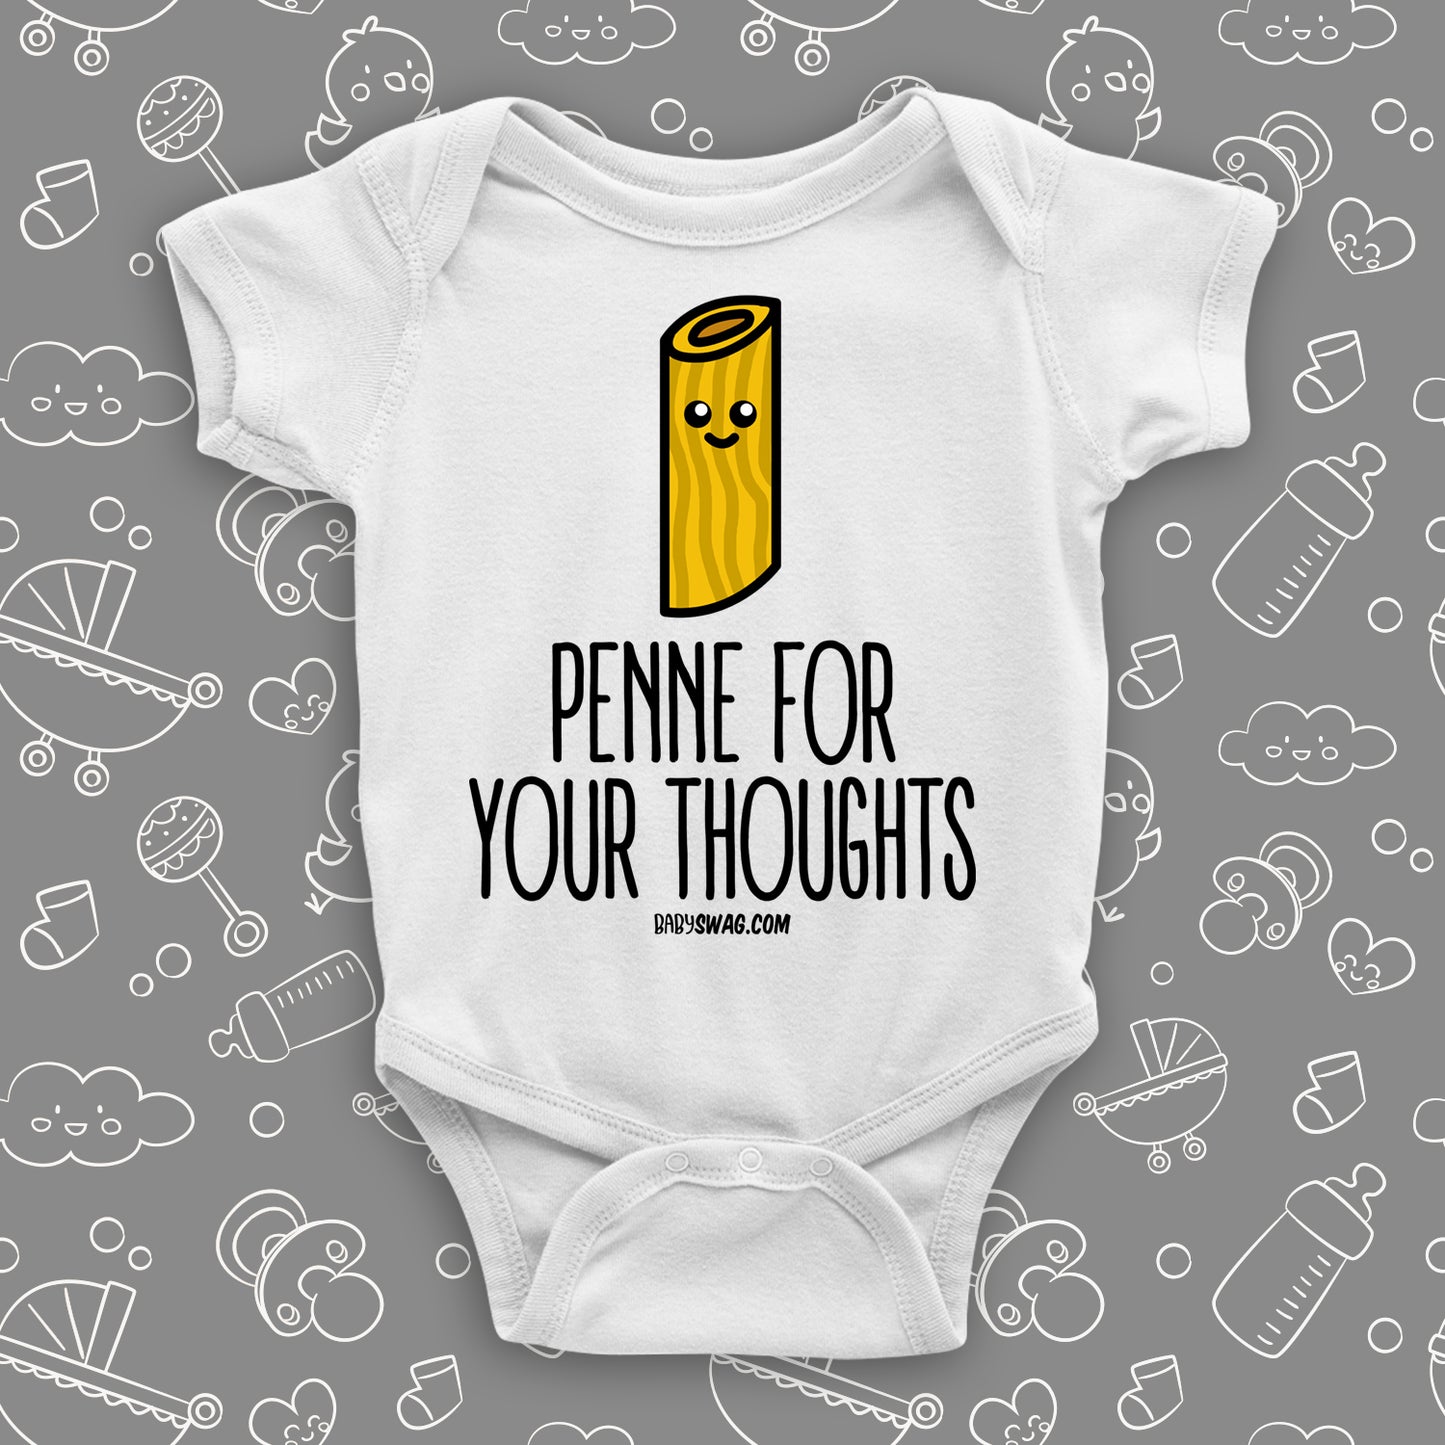 The ''Penne For Your Thoughts'' cute baby onesies in white.